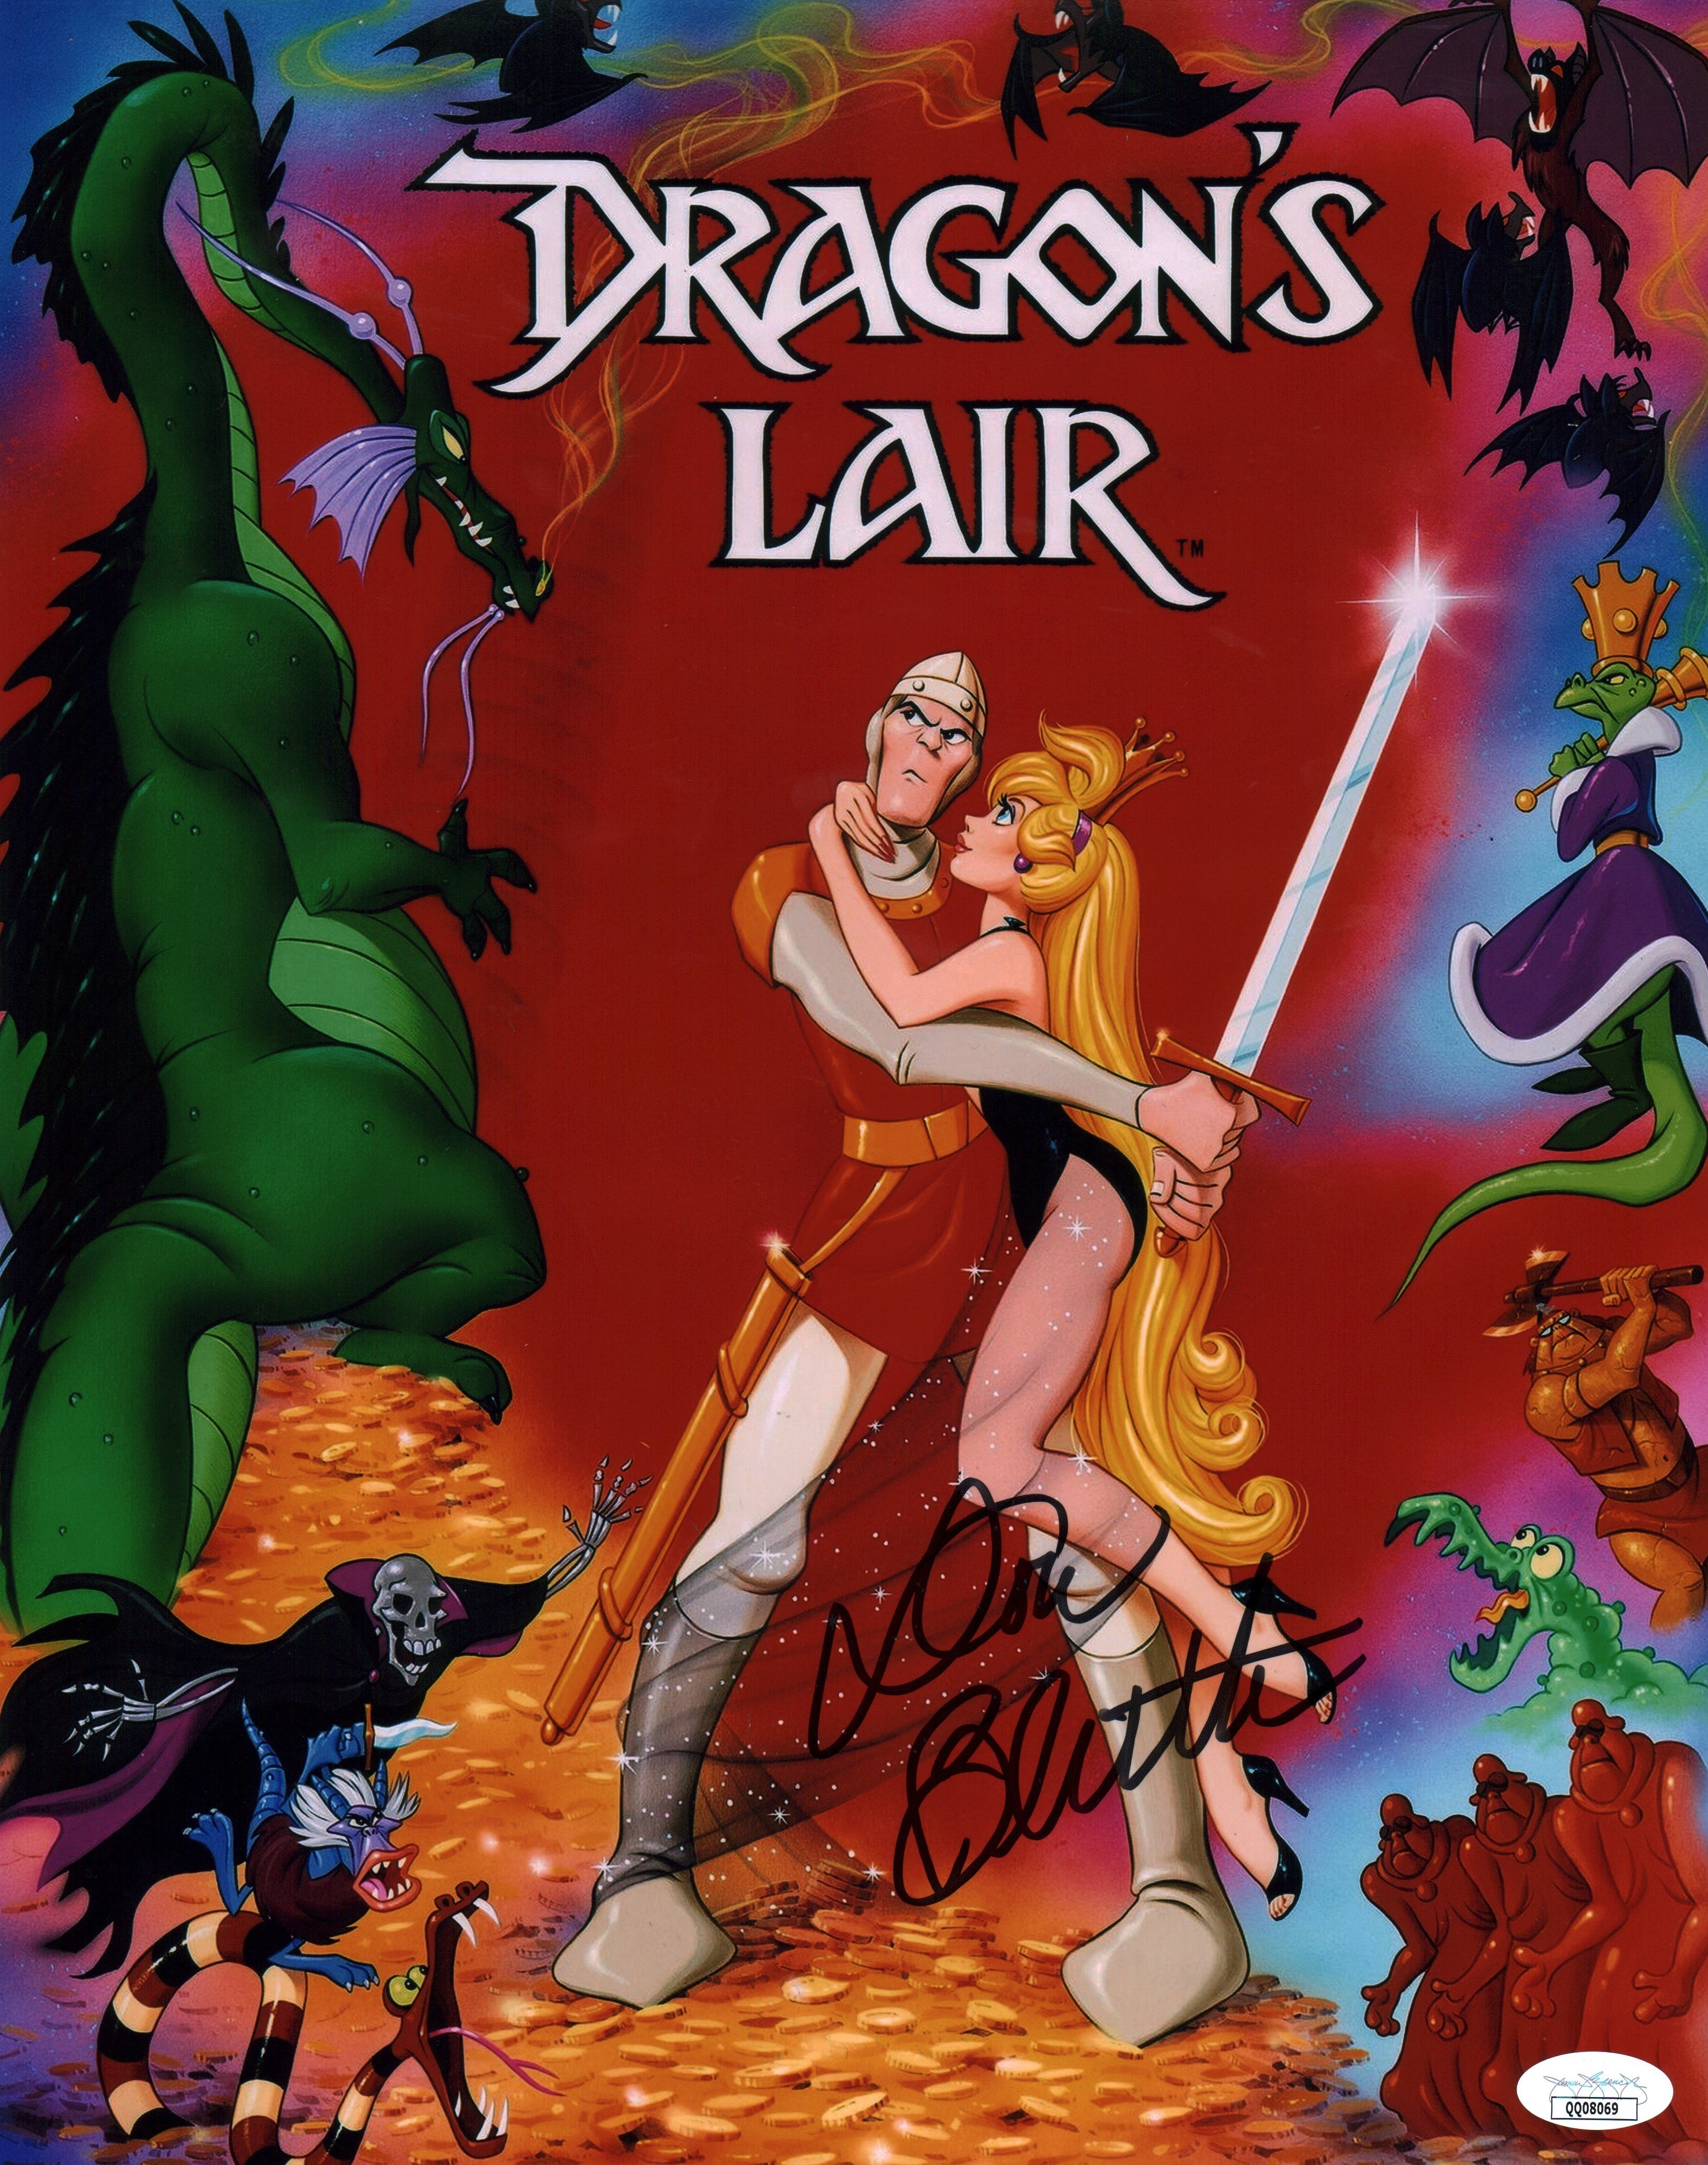 Don Bluth Dragon's Lair 11x14 Signed Mini Poster JSA Certified Autograph